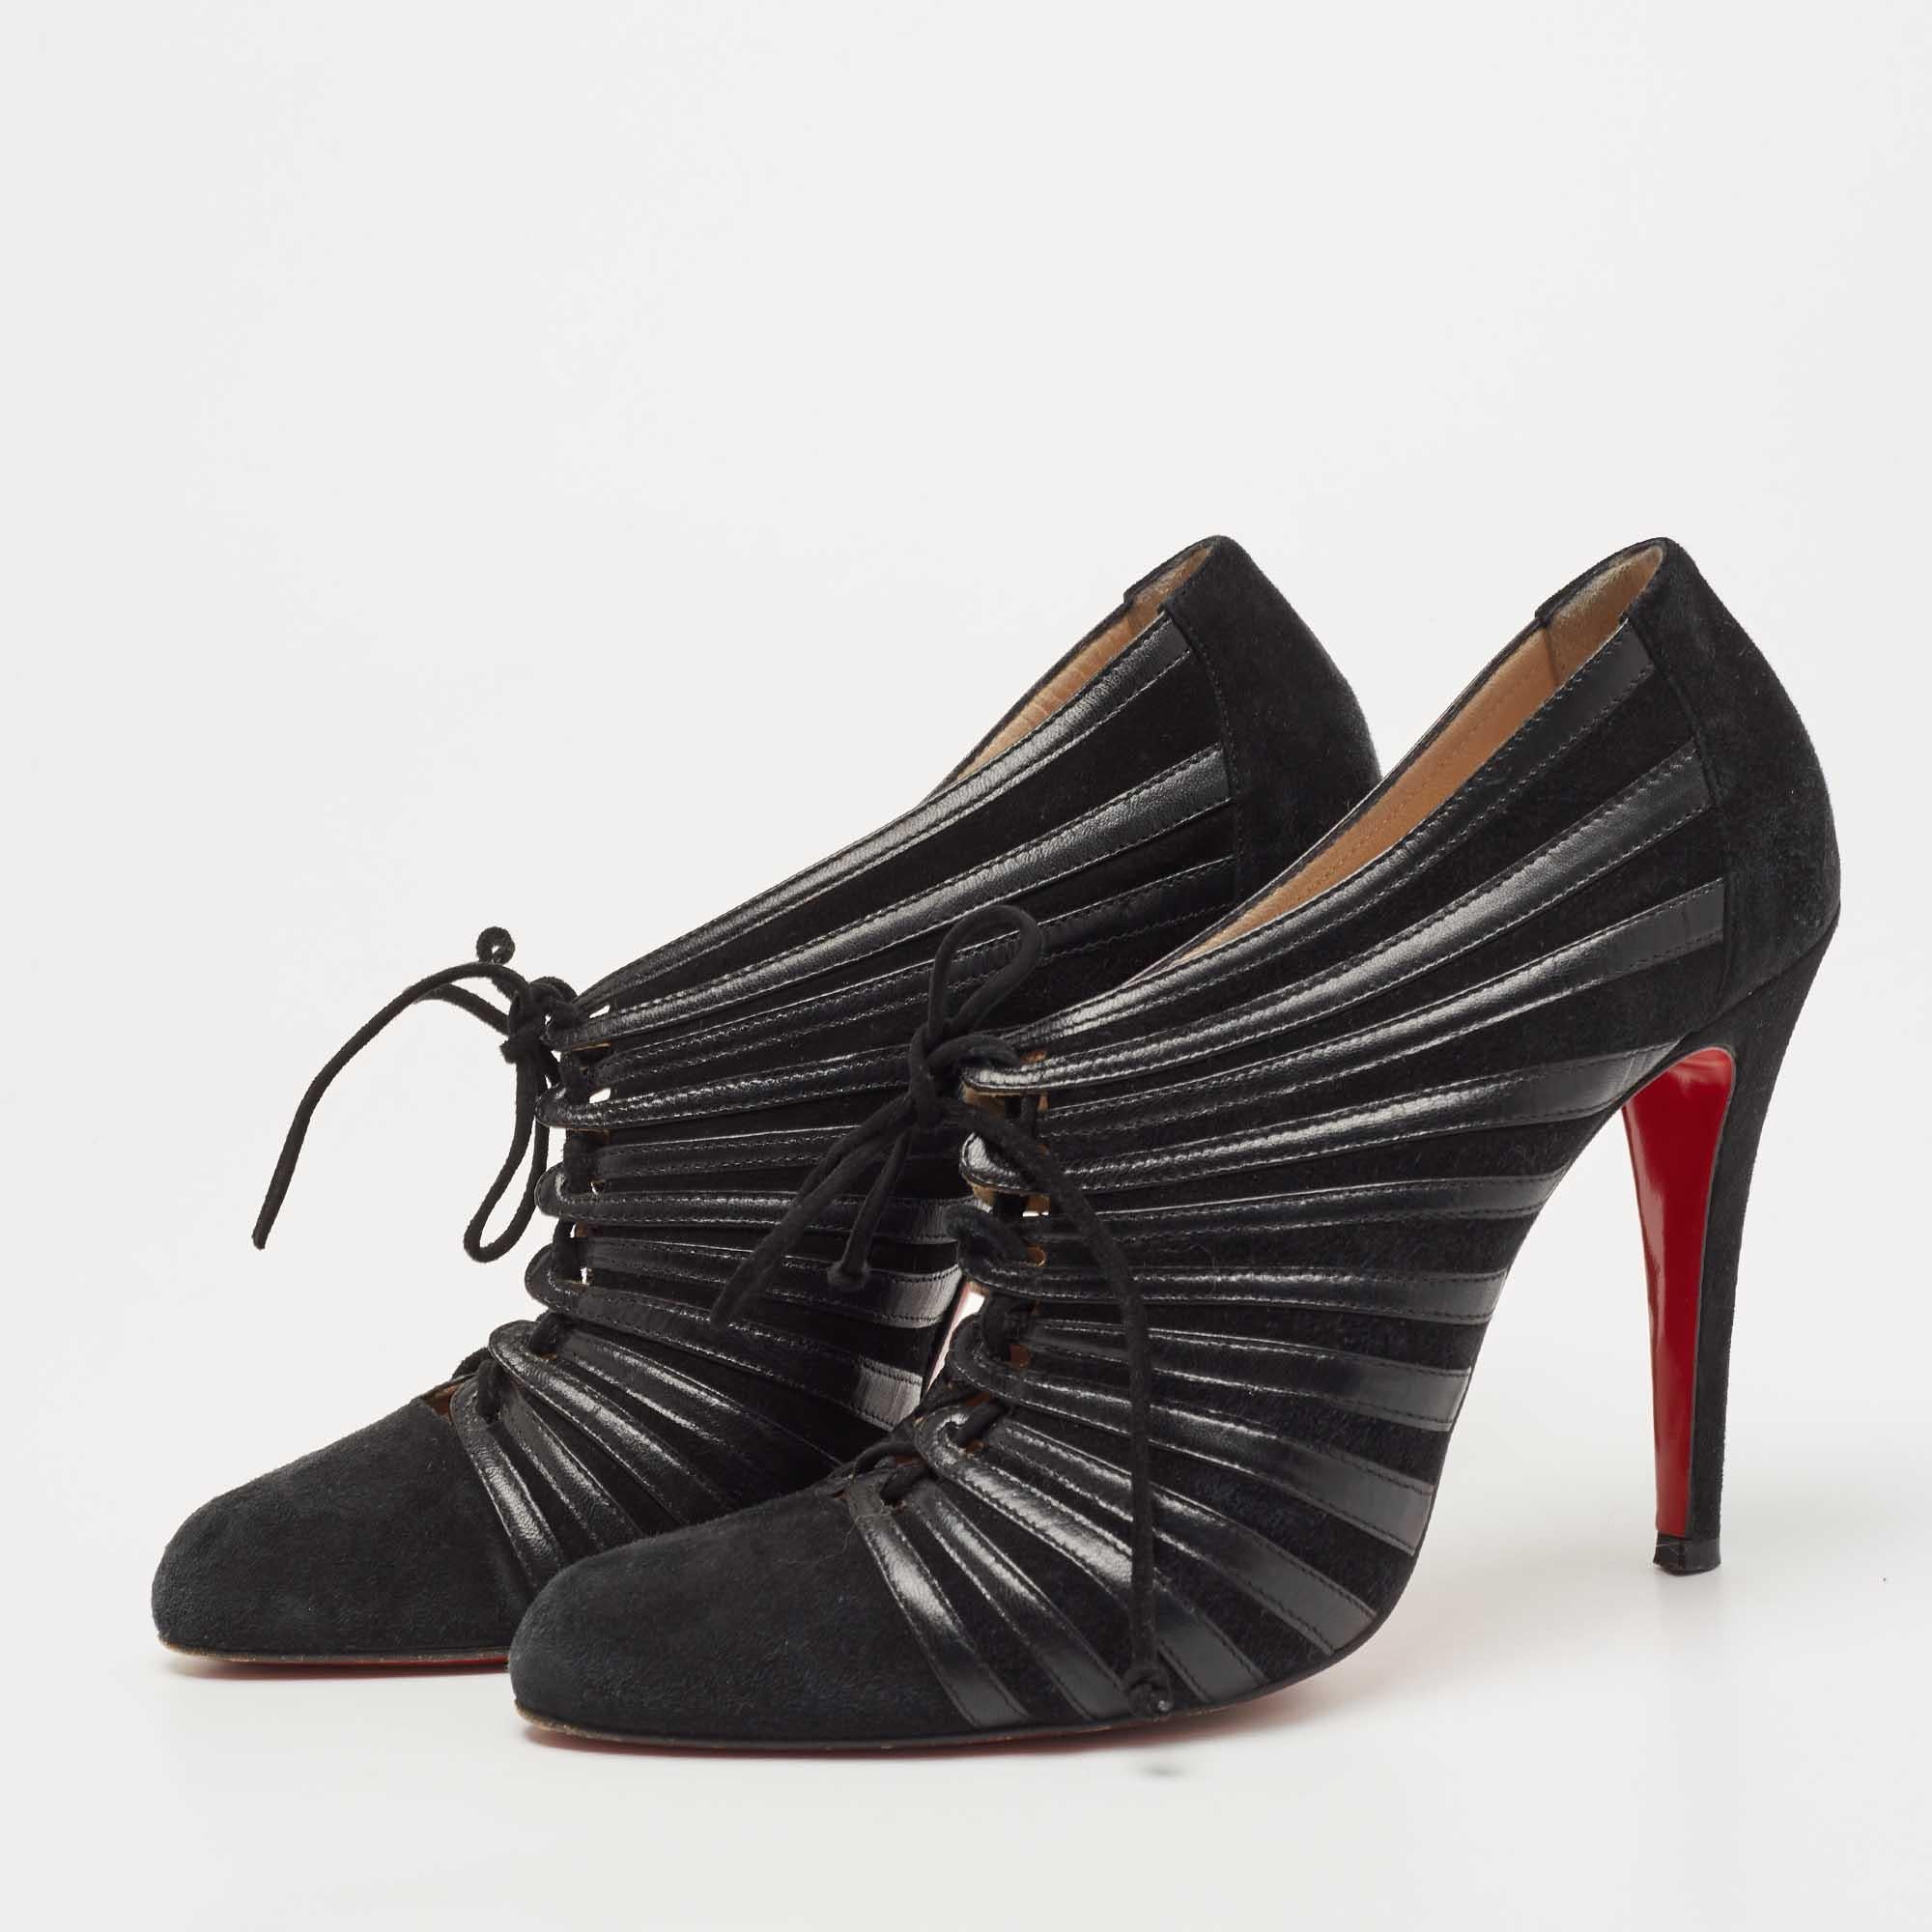 Enjoy the most fashionable days with these Christian Louboutin booties. Modern in design and craftsmanship, they are fashioned to keep you comfortable and chic!

